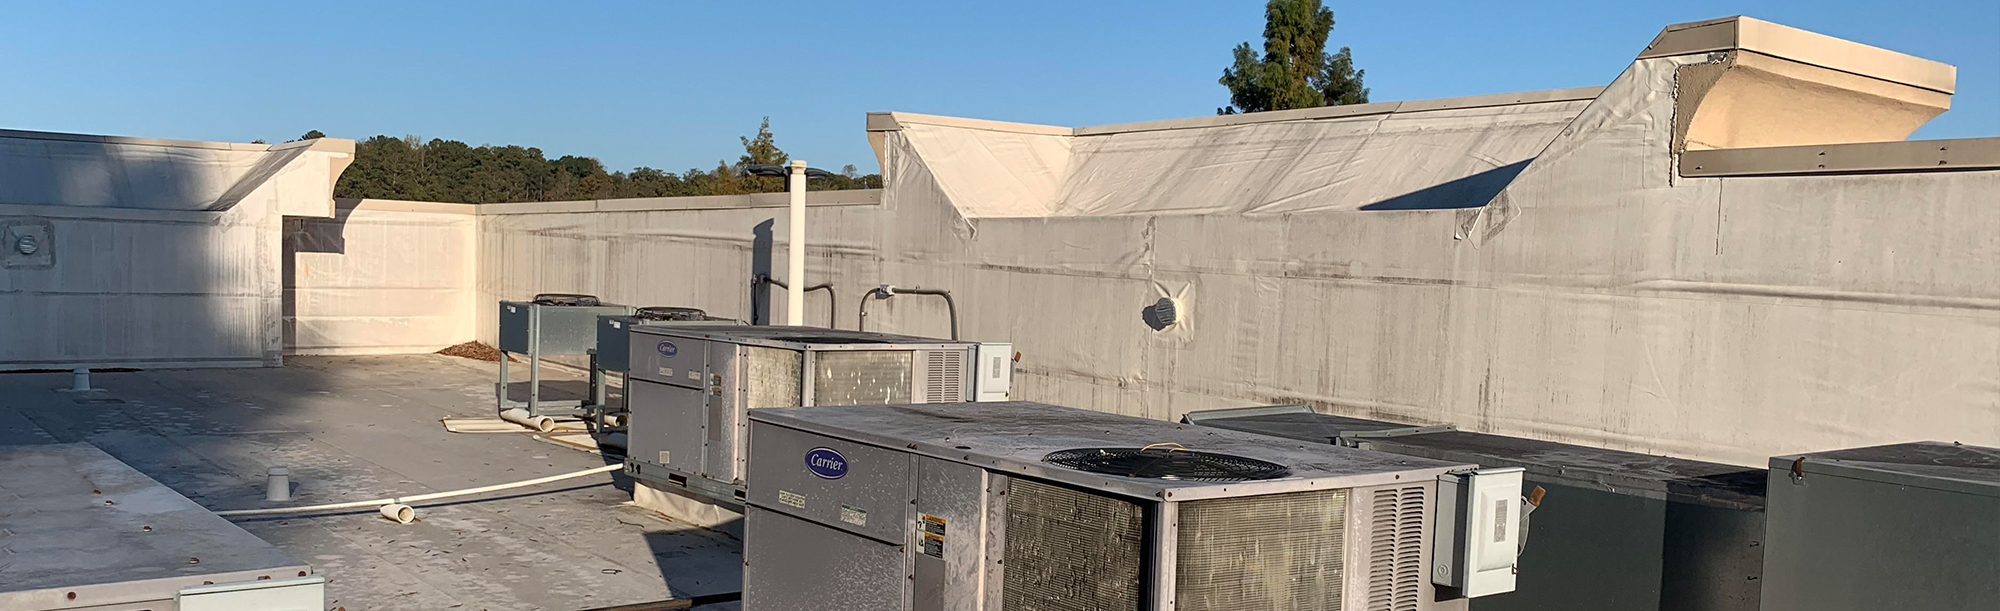 Restaurant HVAC Service for Cooling & Heating in Canton, Georgia